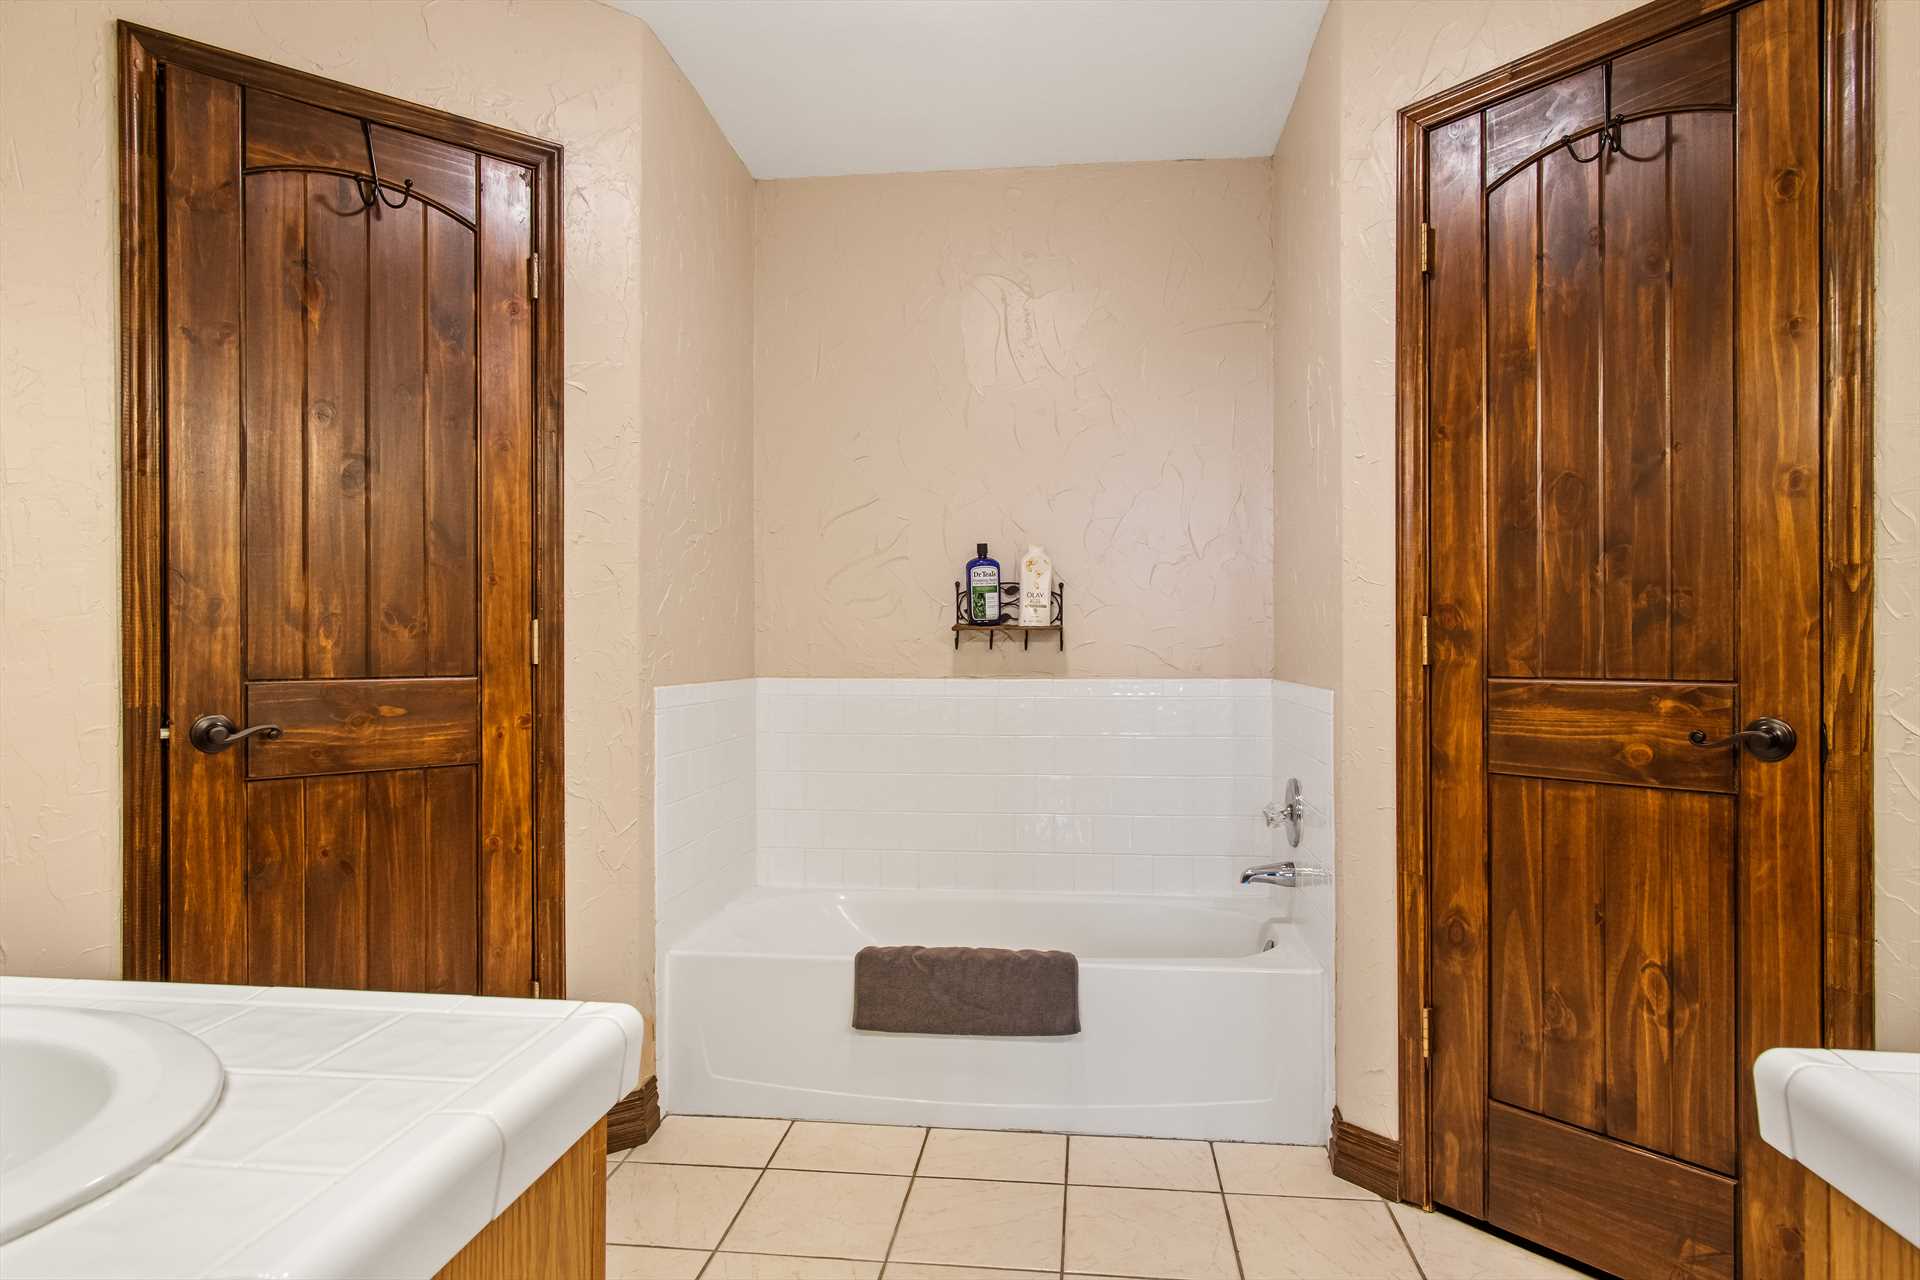                                                 The second bedroom at the Retreat has its own full bath, complete with a tub, shower, and twin vanities.